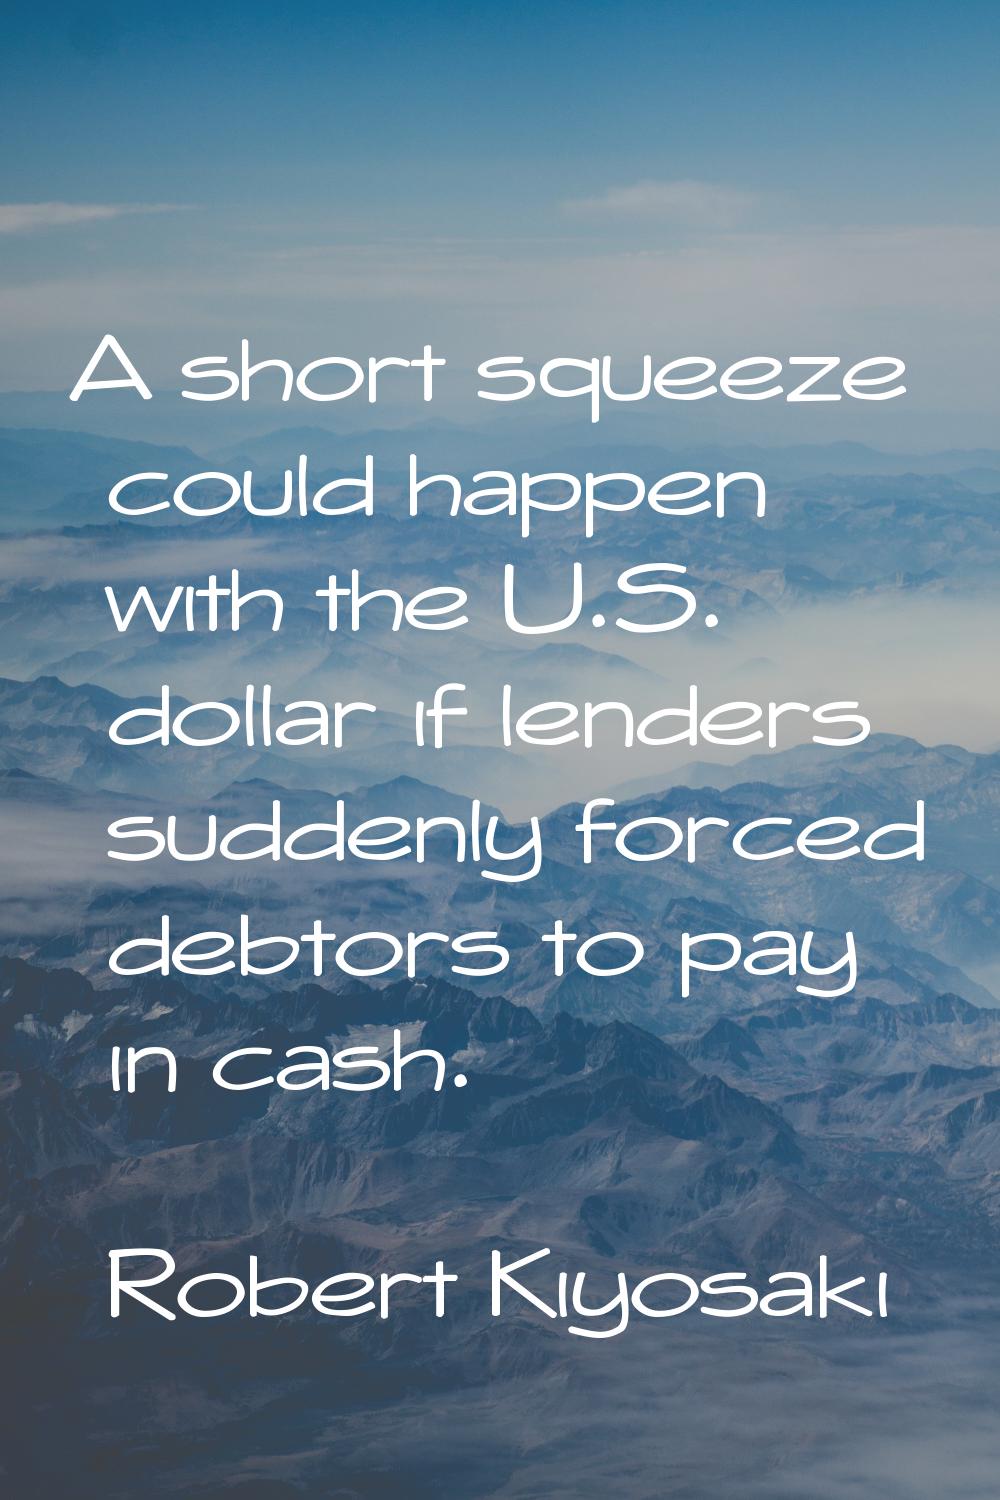 A short squeeze could happen with the U.S. dollar if lenders suddenly forced debtors to pay in cash